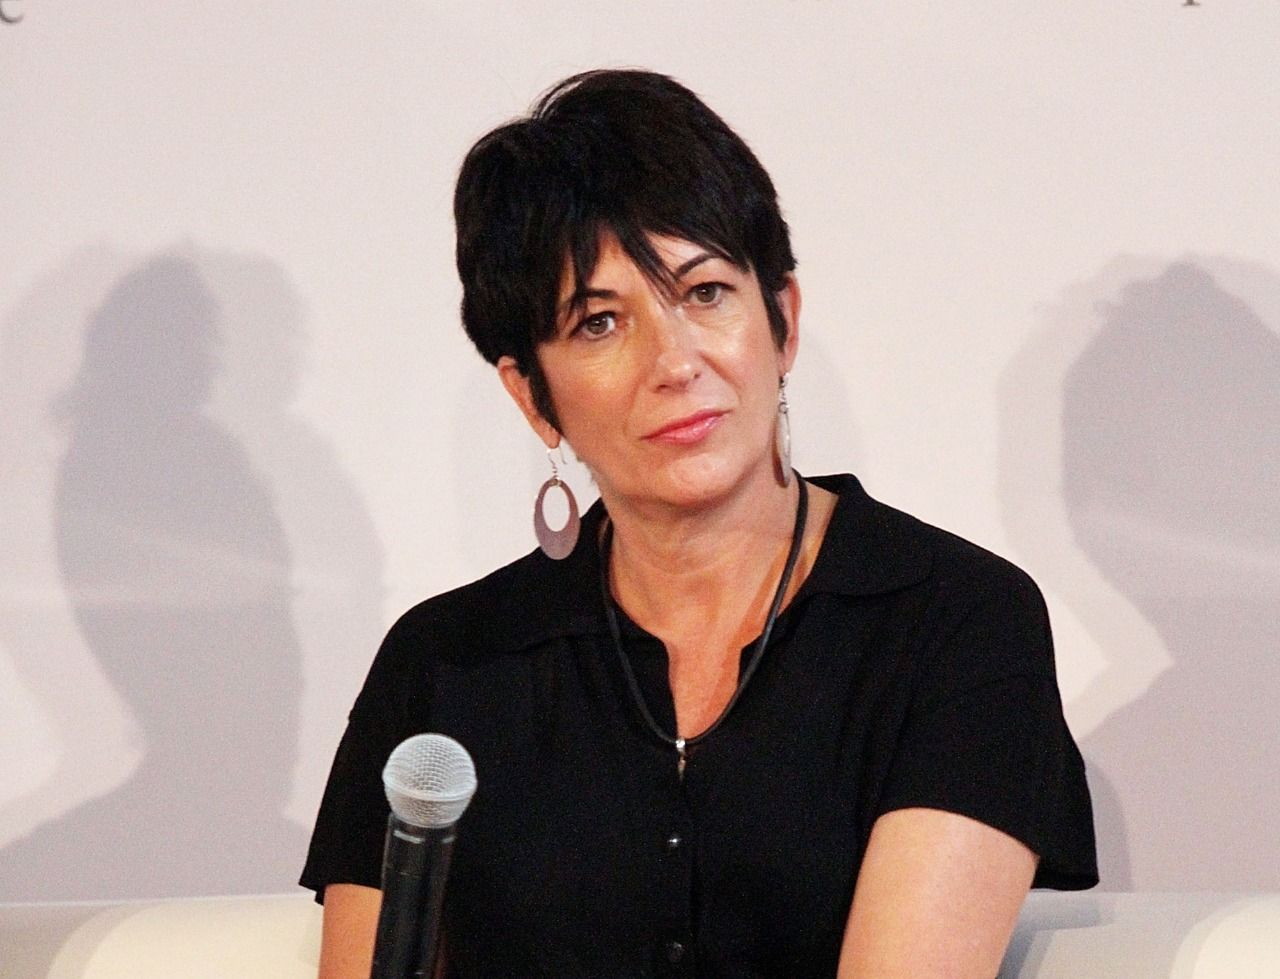 Ghislaine Maxwell’s family afraid after modelling agent close to Epstein found hanged: Report